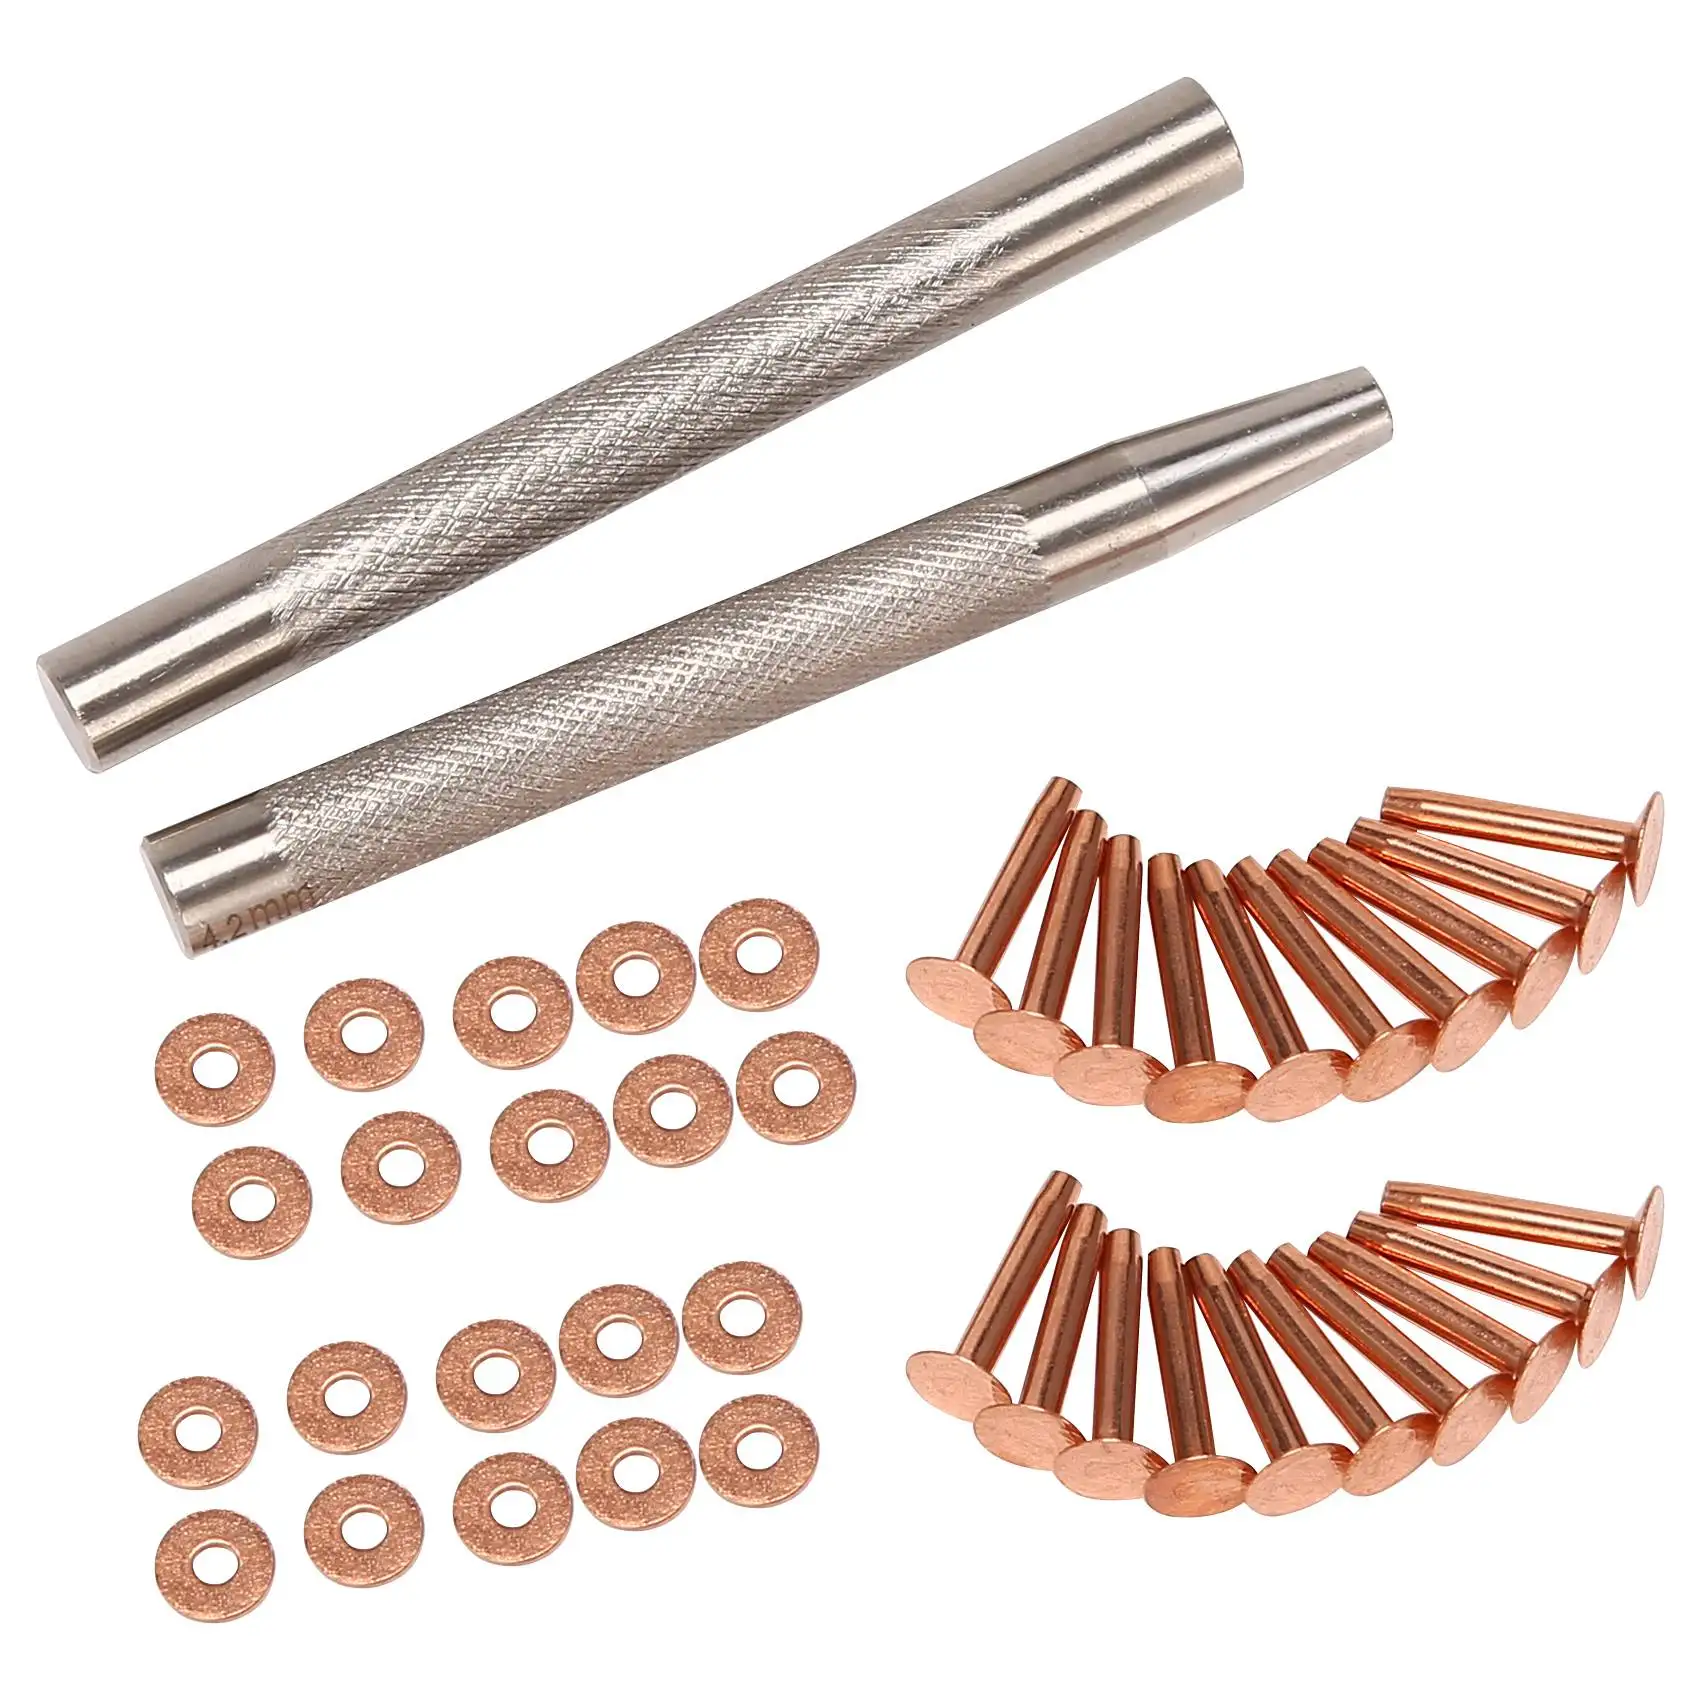 

20Pack Copper Rivets and Burrs (14mm and 19mm) with 2Pcs Punch Rivet Tool for Belts Bags Collars Leather-Crafting